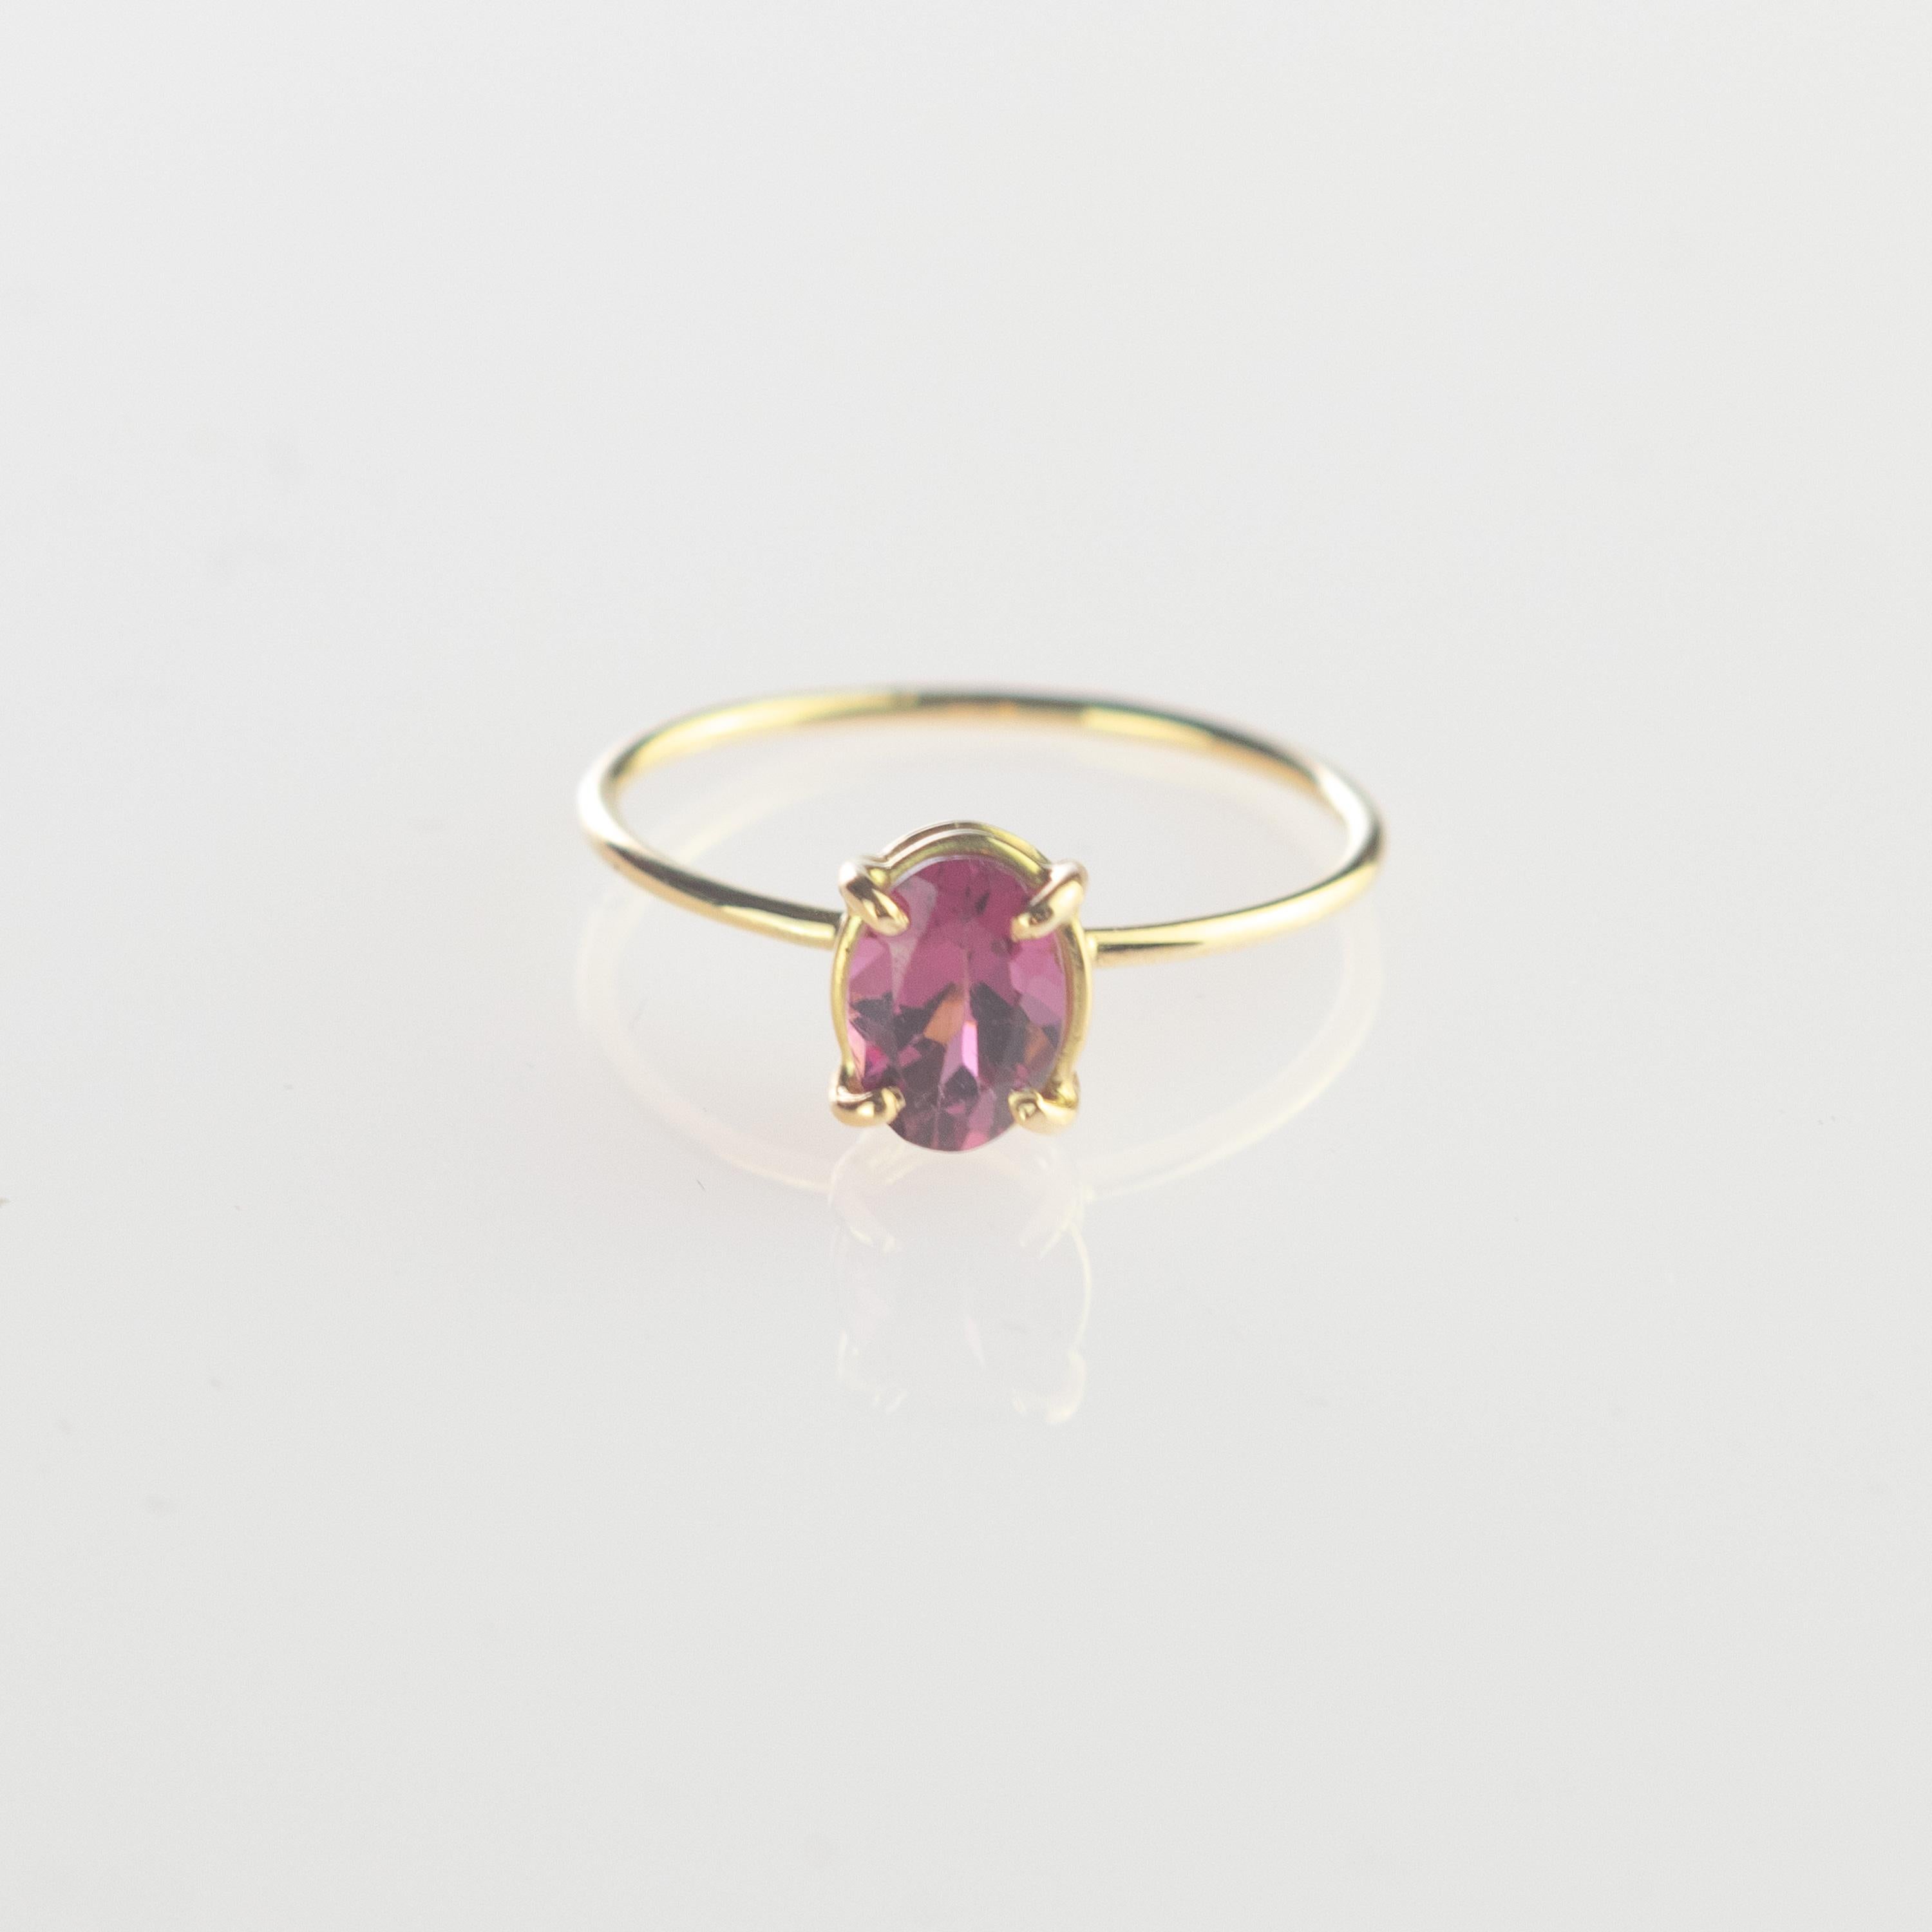 Oval cabochon solitaire ring design, with shining sparkles. 0.5 carat Rubellite on 18 karat yellow gold ring inspired by the joy of summer sunsets. With a perfect size, it will fill with your daily elegant outfits.

You will be impressed by its